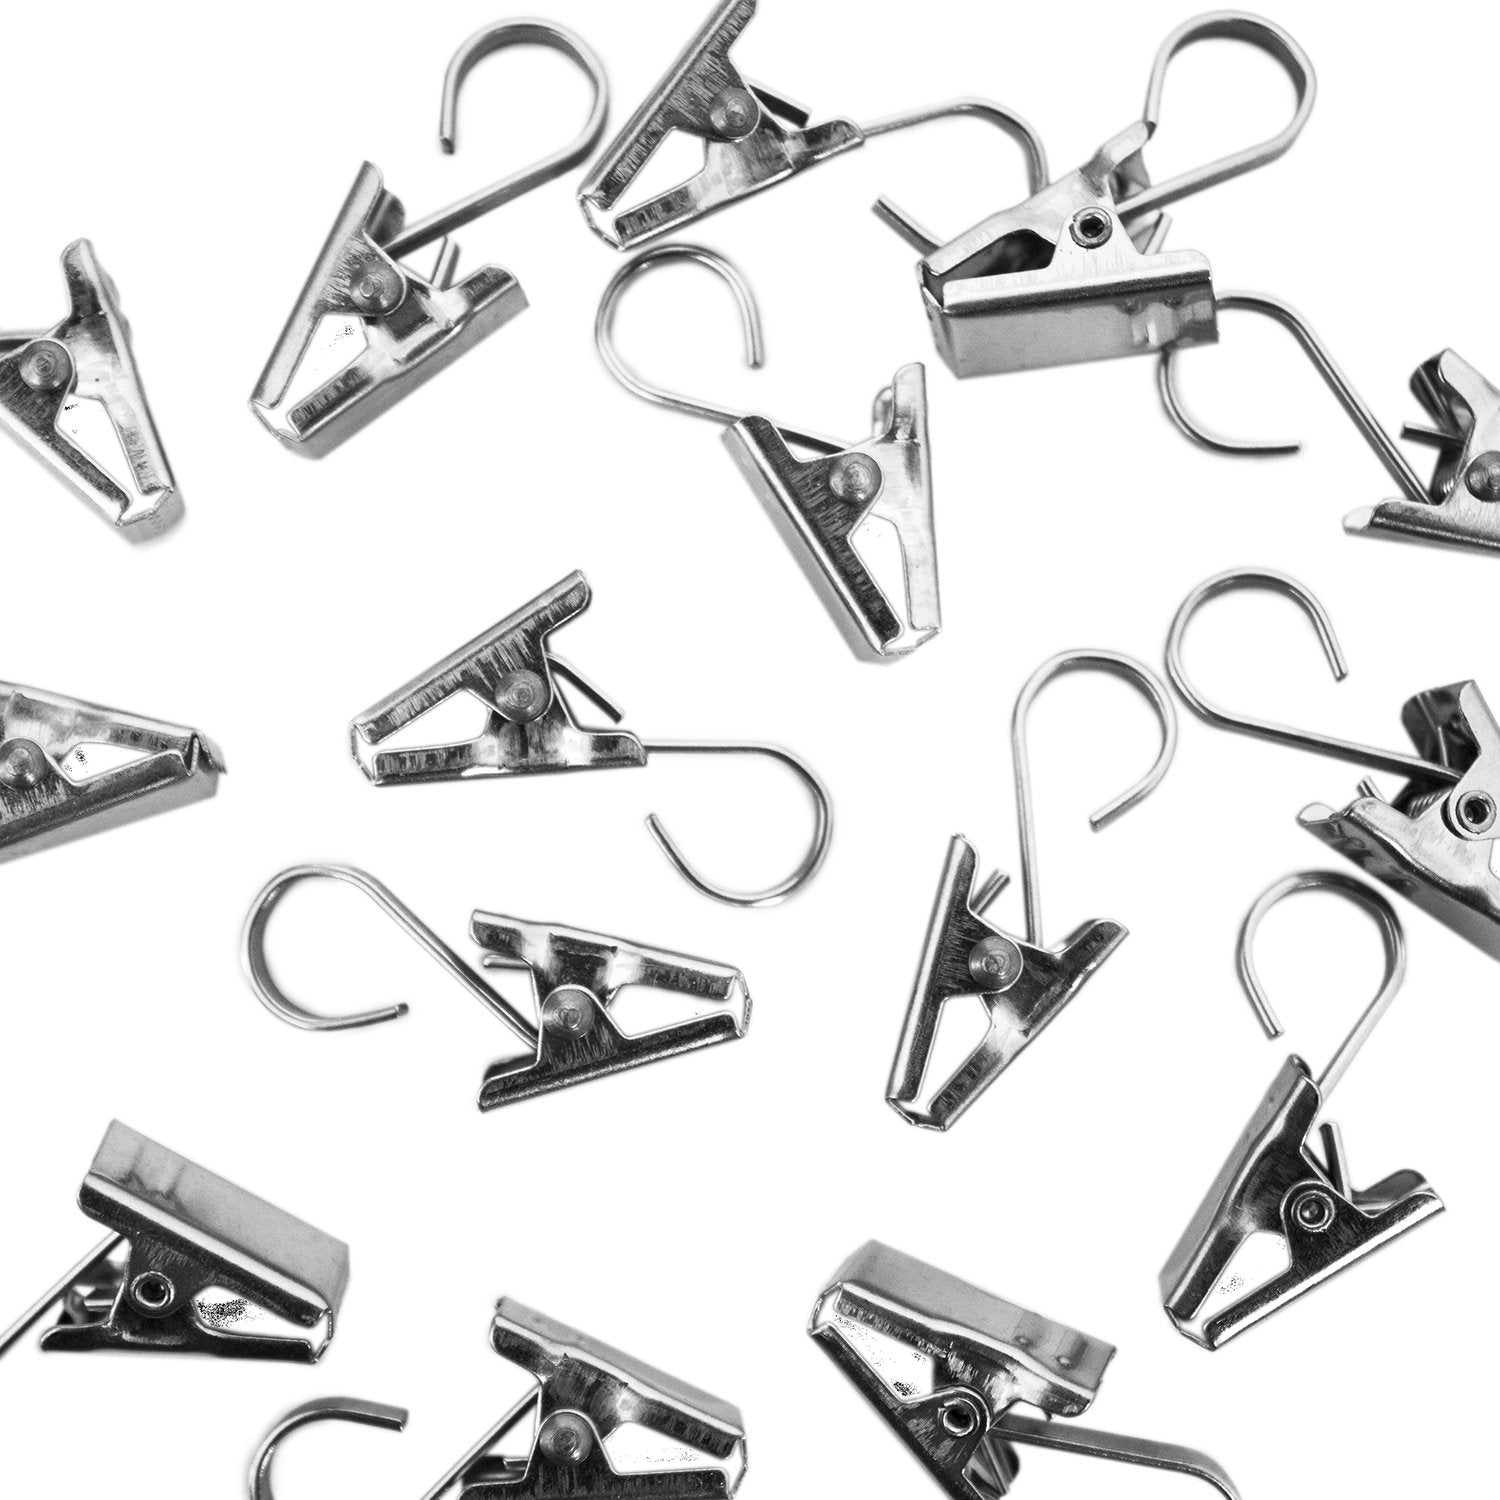 Heavy Duty Satin Nickel Curtain Clips w/ Hook for Photos, Showers, Bedroom, Living Room, Home Decoration, Arts & Crafts, 1.5" x 0.5" inch (20 Hooks) by Super Z OutletÂ®